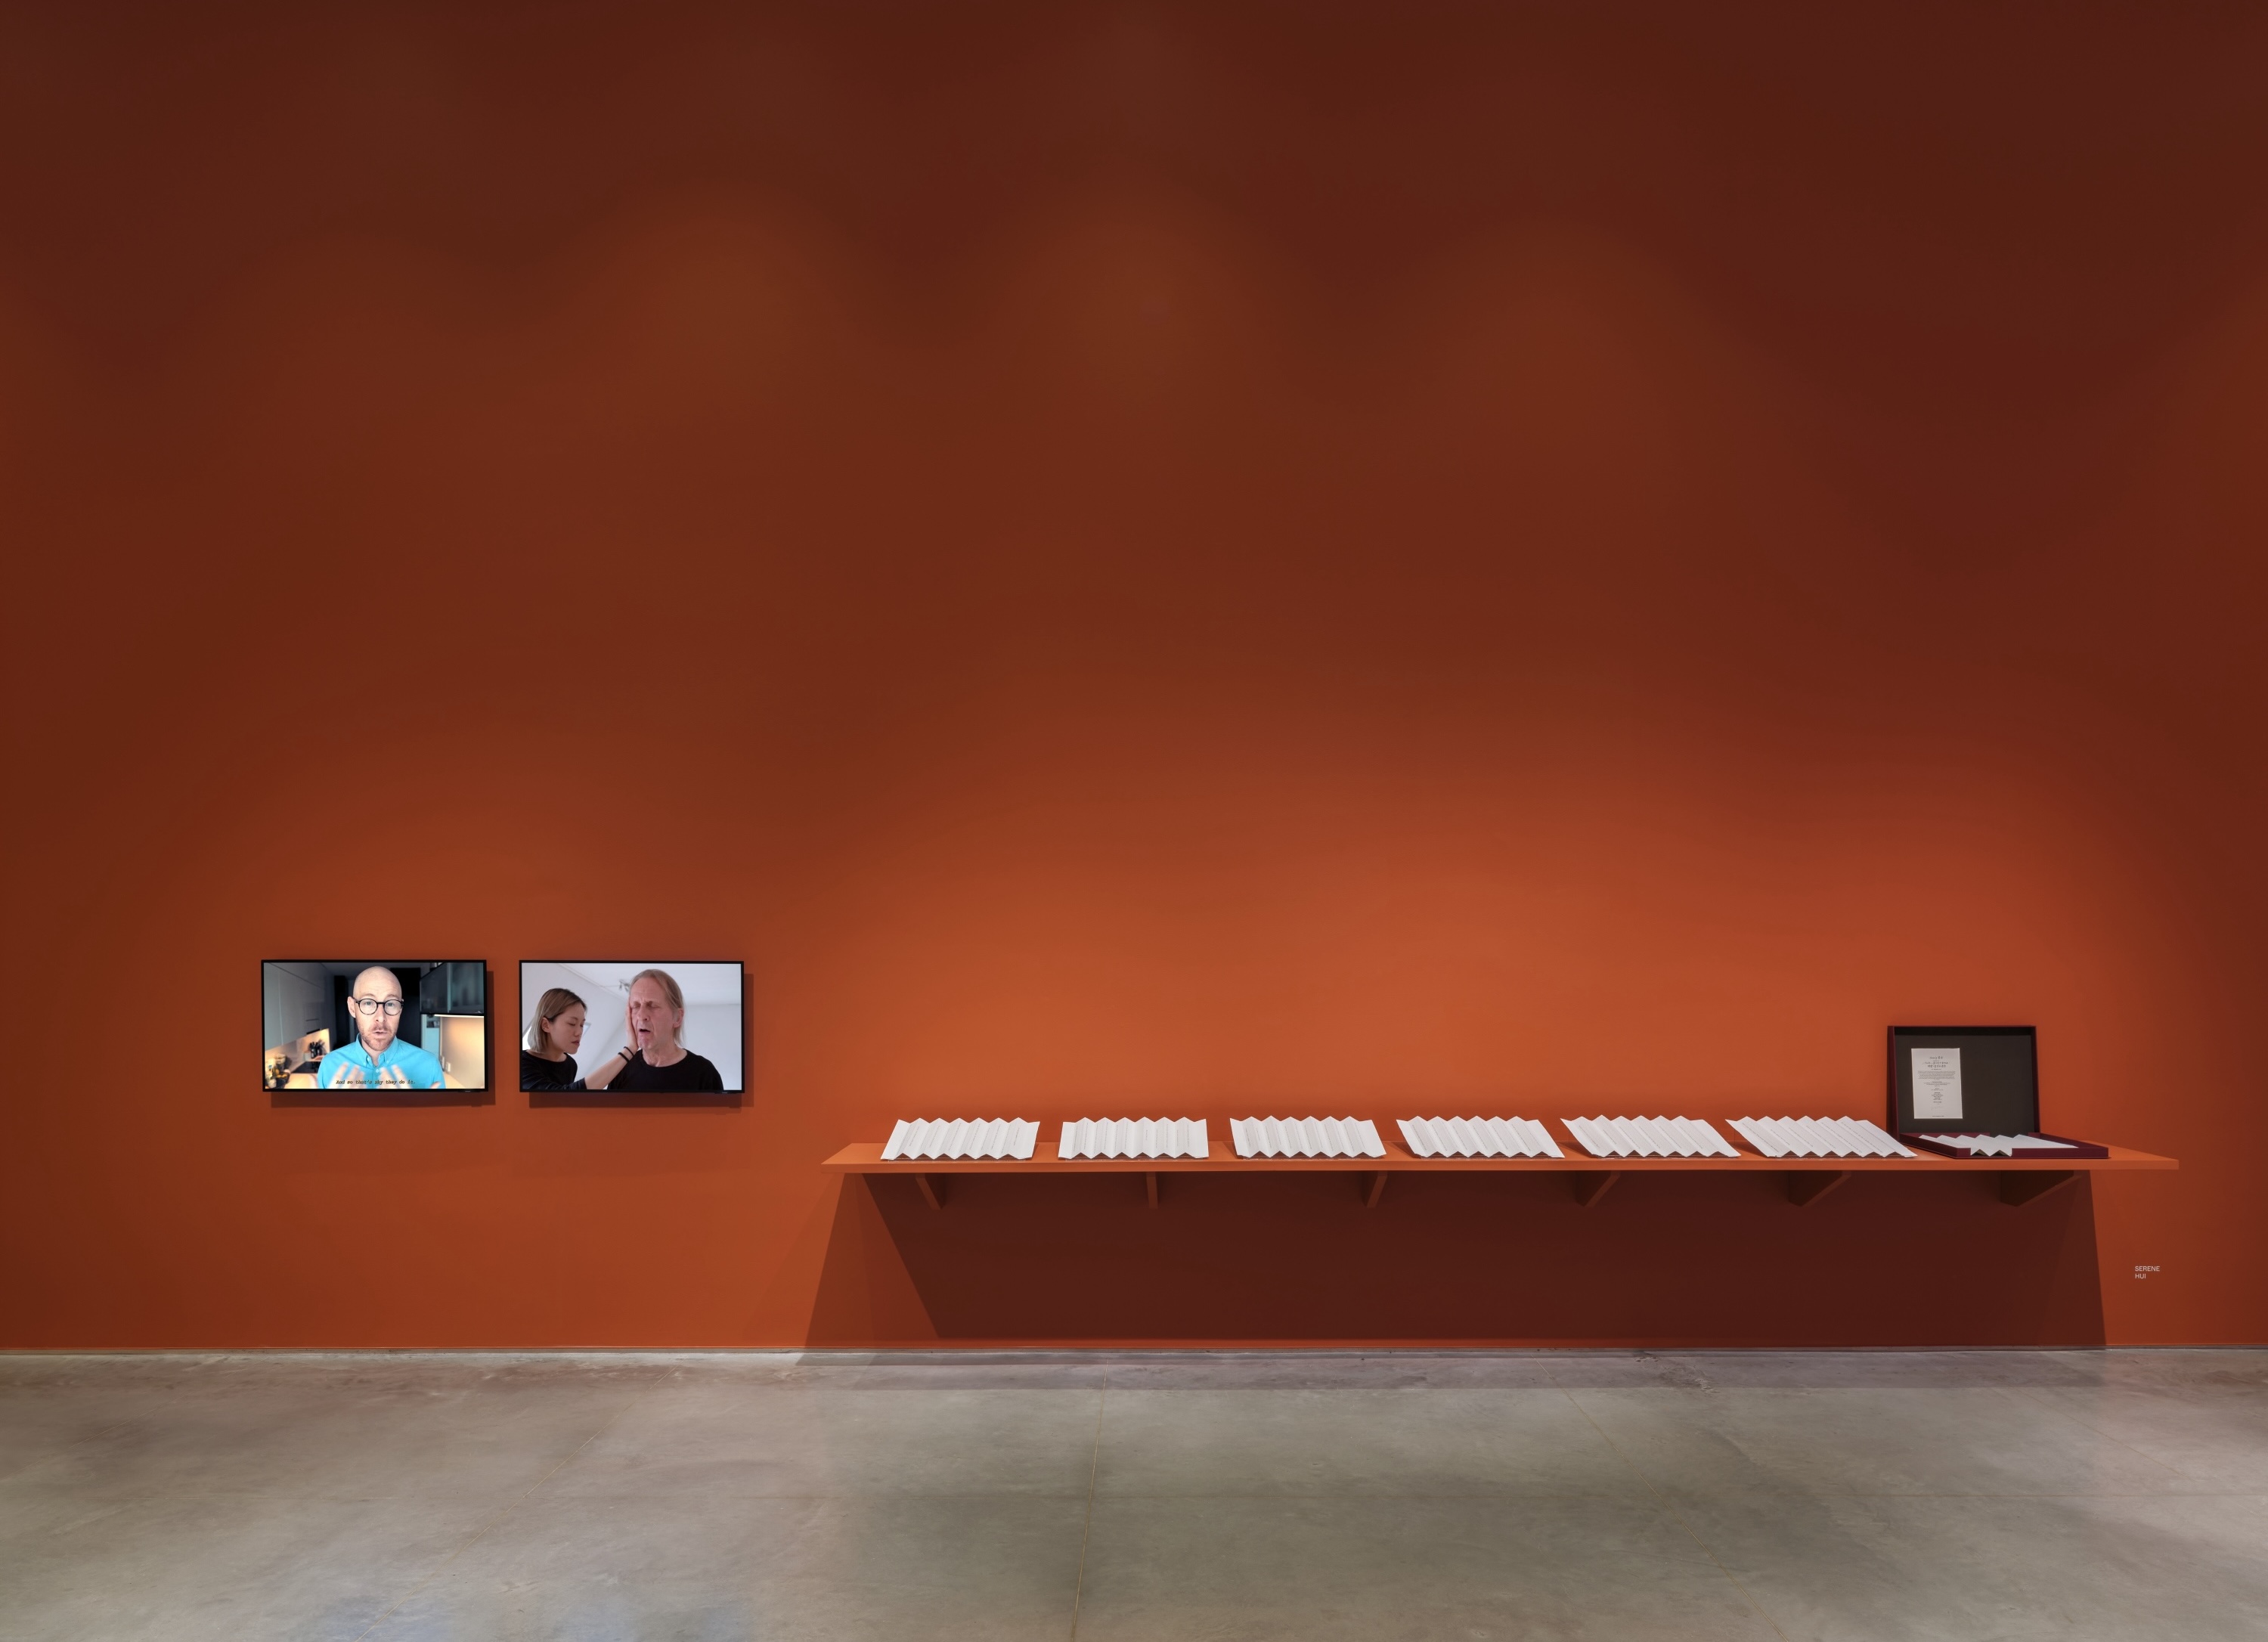 A terracotta-red wall connecting to a gray floor. On the left are two monitors displaying a left and right-channel video. The left-channel video alternates between shots of mouts speaking and footage from popular culture films and television. The right-channel video features a white man and an East Asian woman practicing vocal exercises. To the middle and right, is a terracotta-red shelf holding a row of seven sheets of embossed paper folded accordion-style. The last paper on the end-right is placed in a red box.